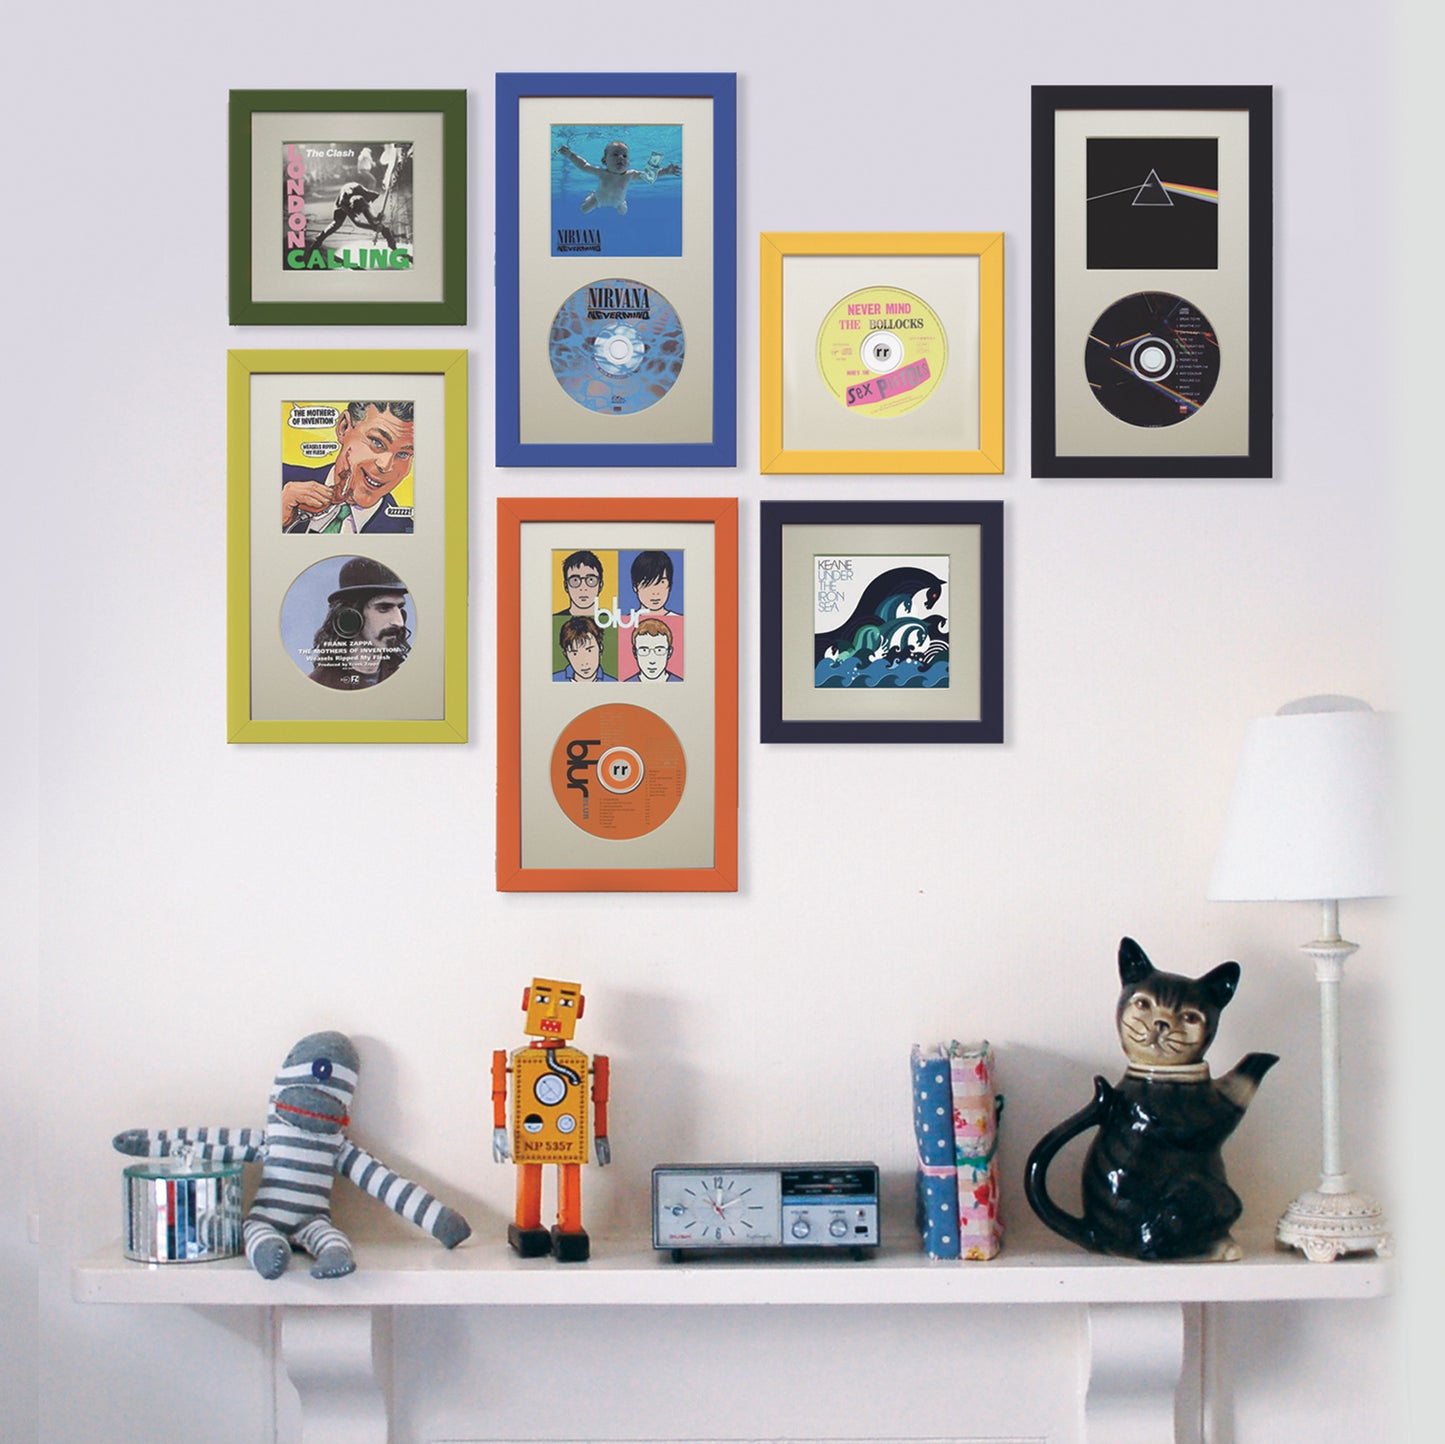 compact disc picture frame for classical albums